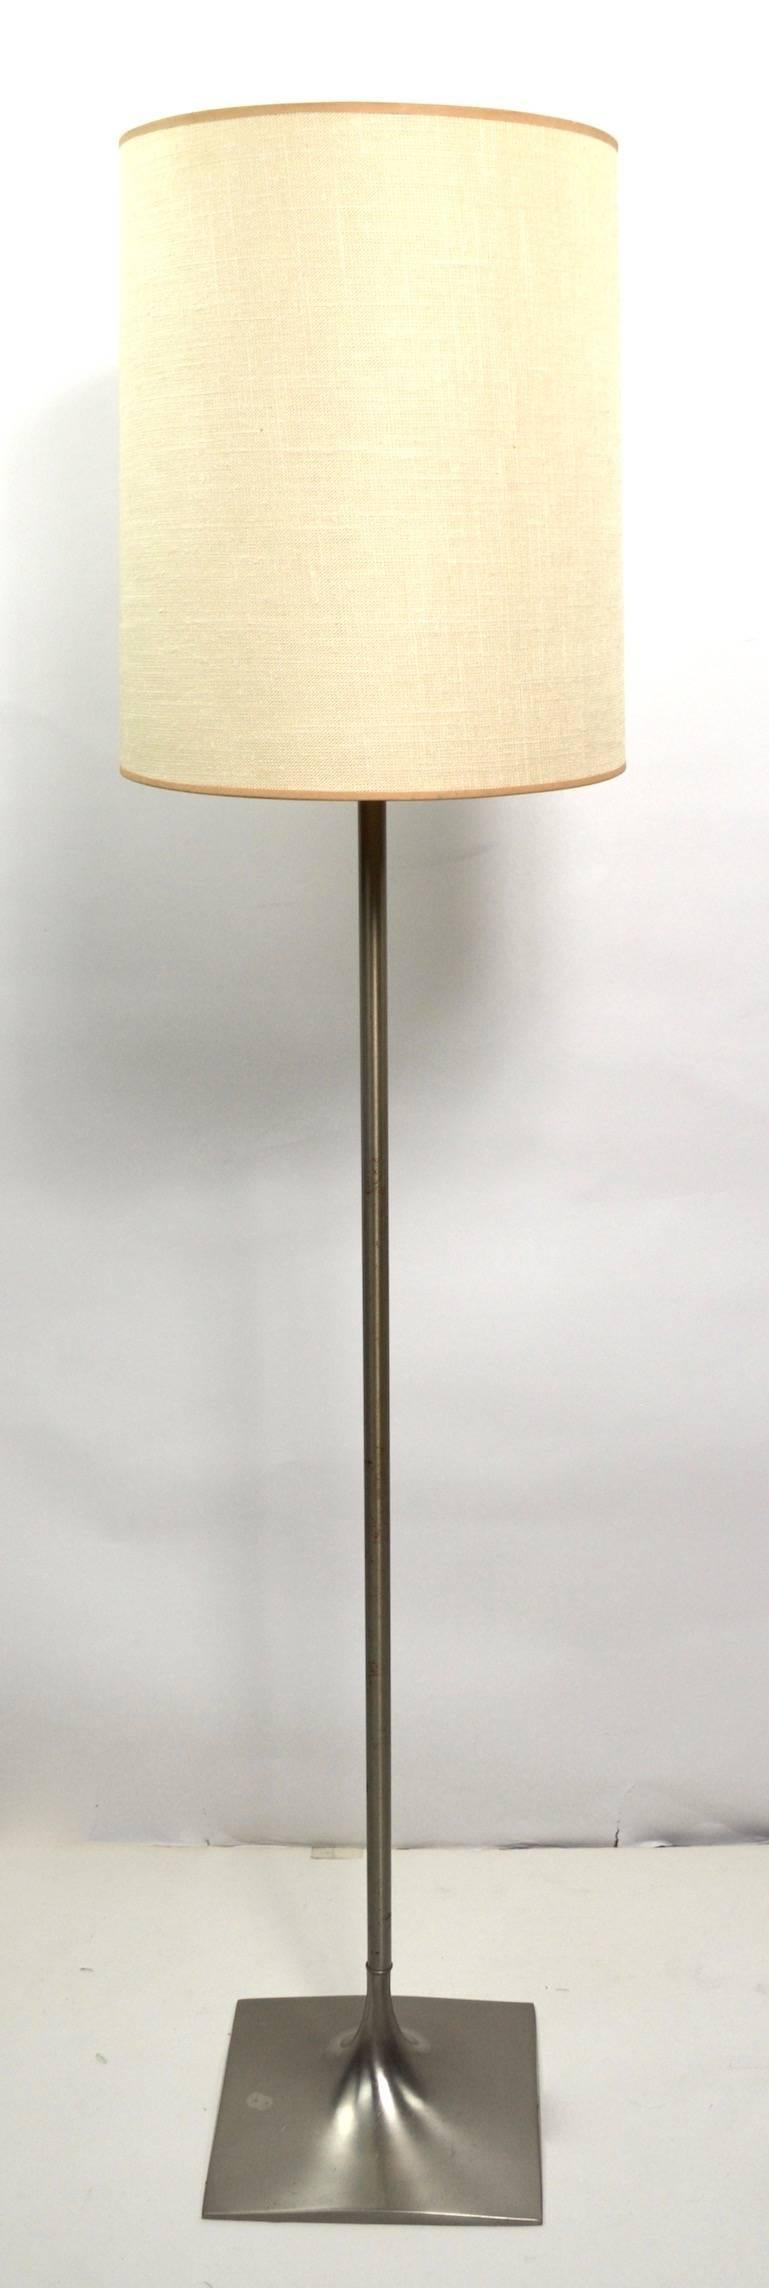 Floor Lamp by Laurel In Good Condition For Sale In New York, NY